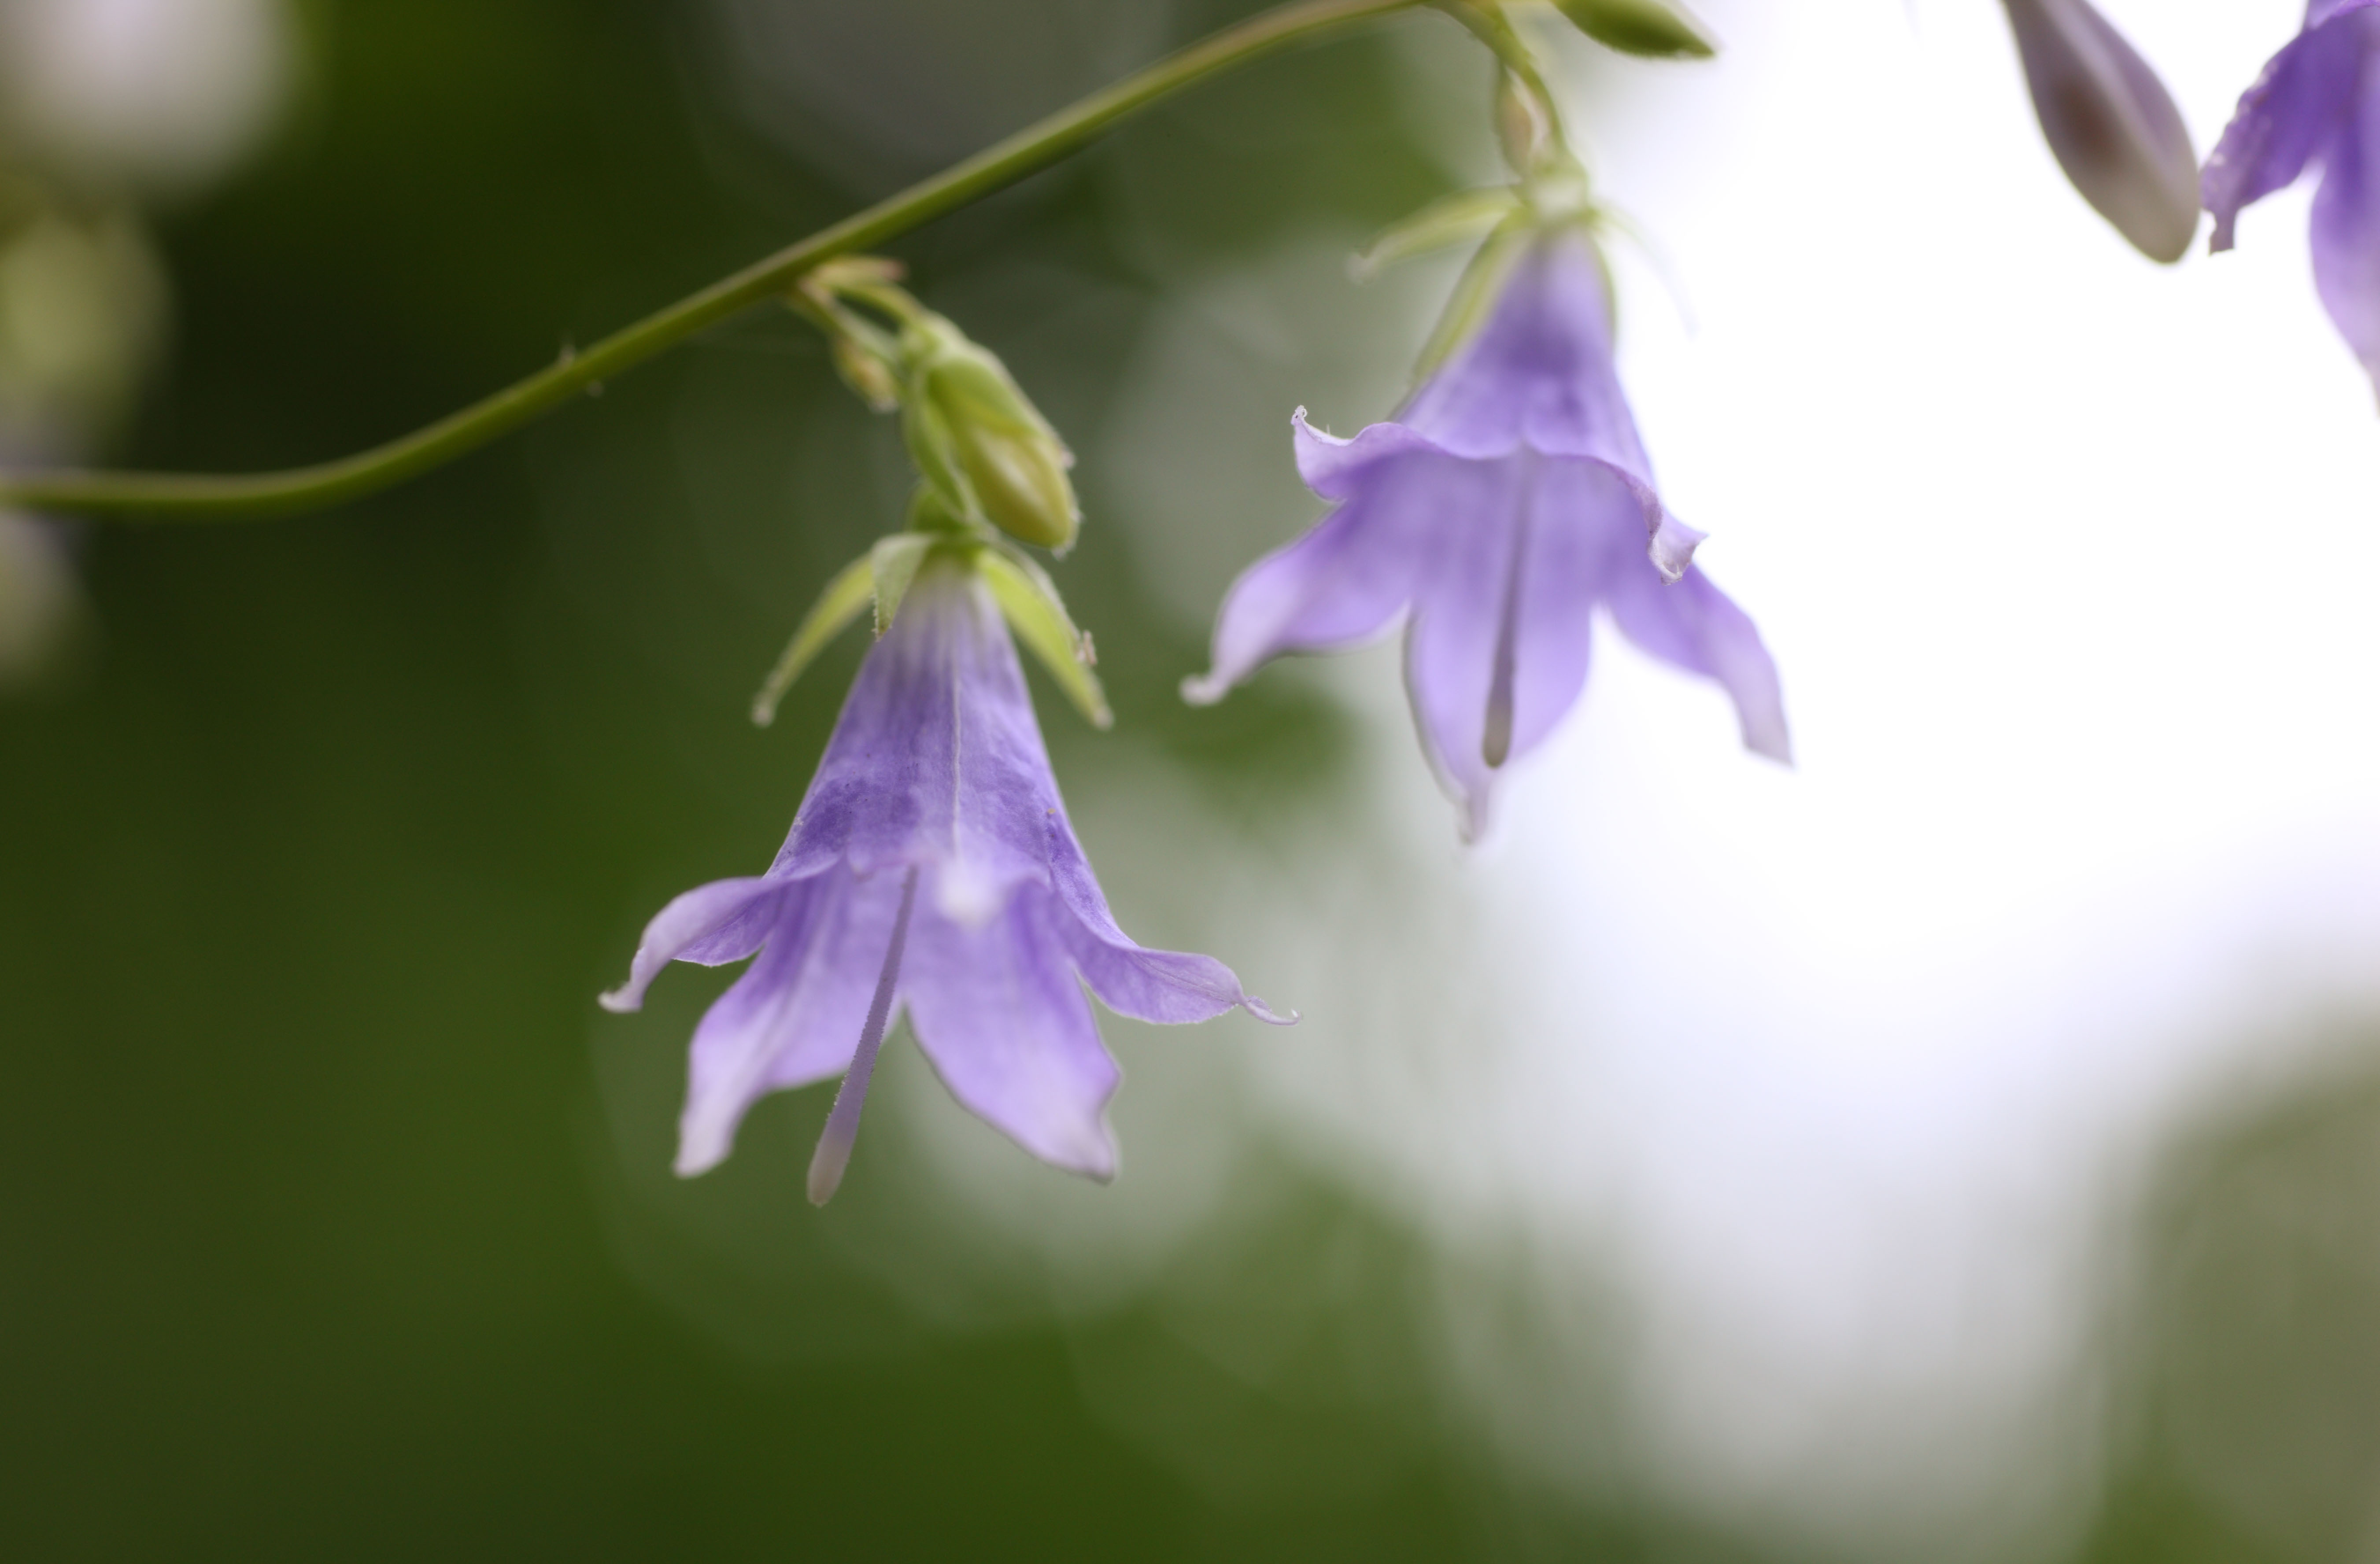 photo,material,free,landscape,picture,stock photo,Creative Commons,Adenophora remotiflora, petal, bellflower, flower of the summer, I am pretty